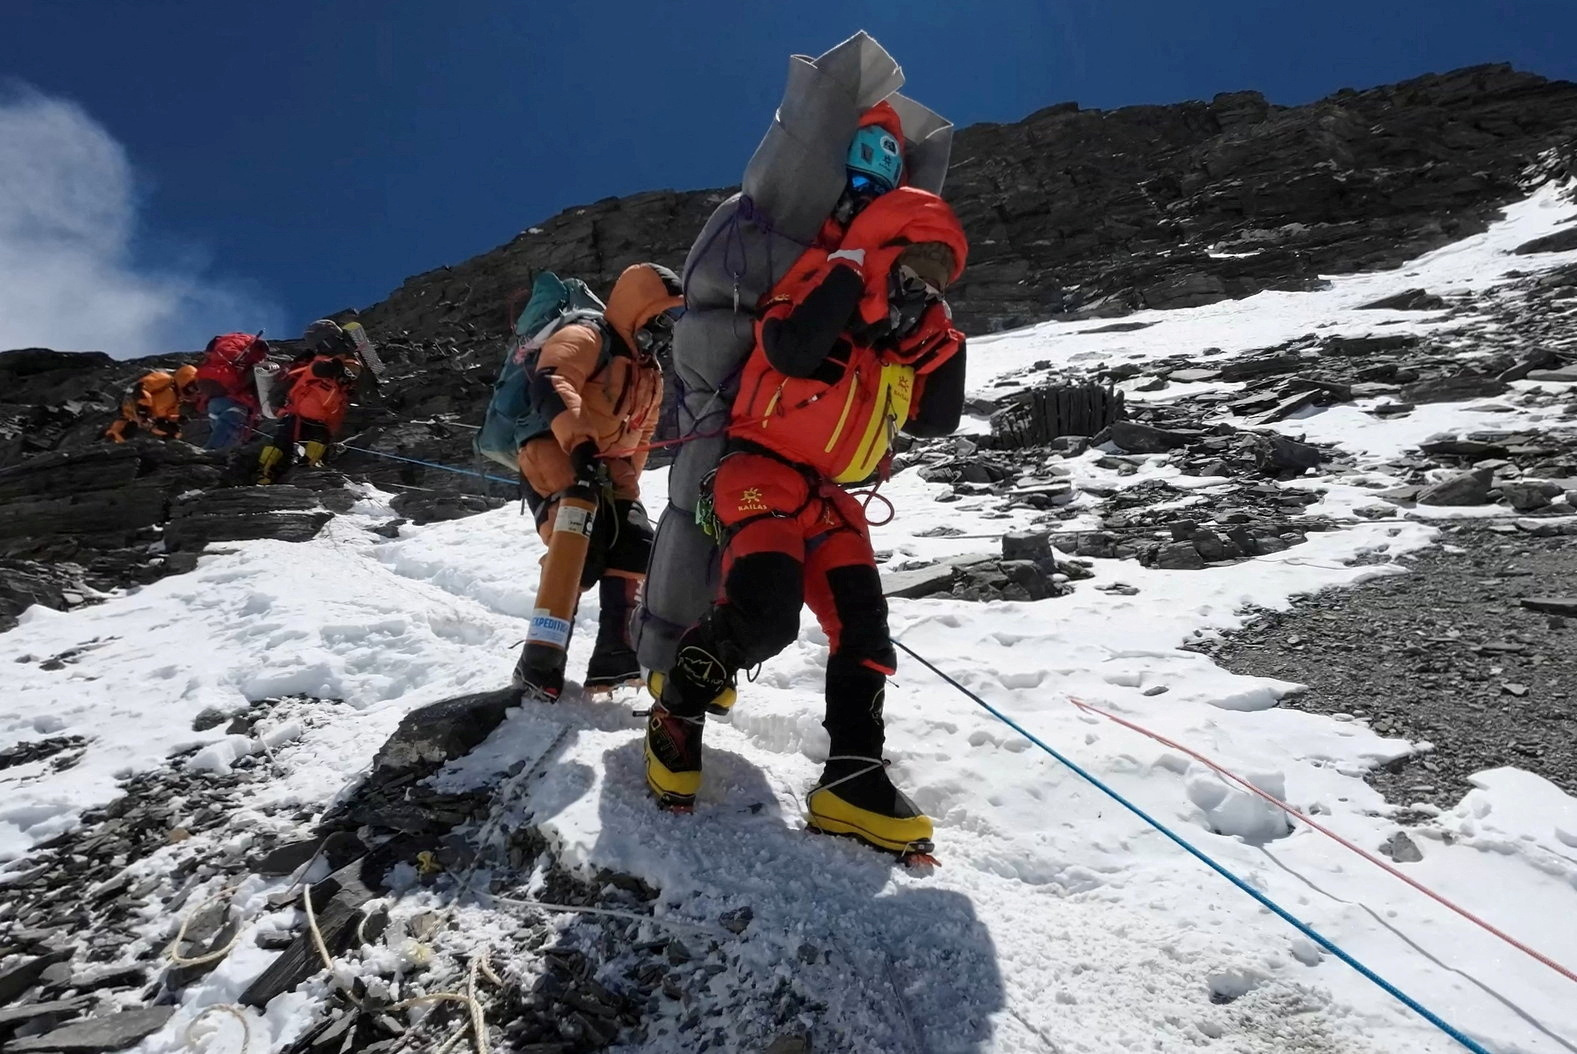 Sherpa carries struggling climber thousands of feet down Mount